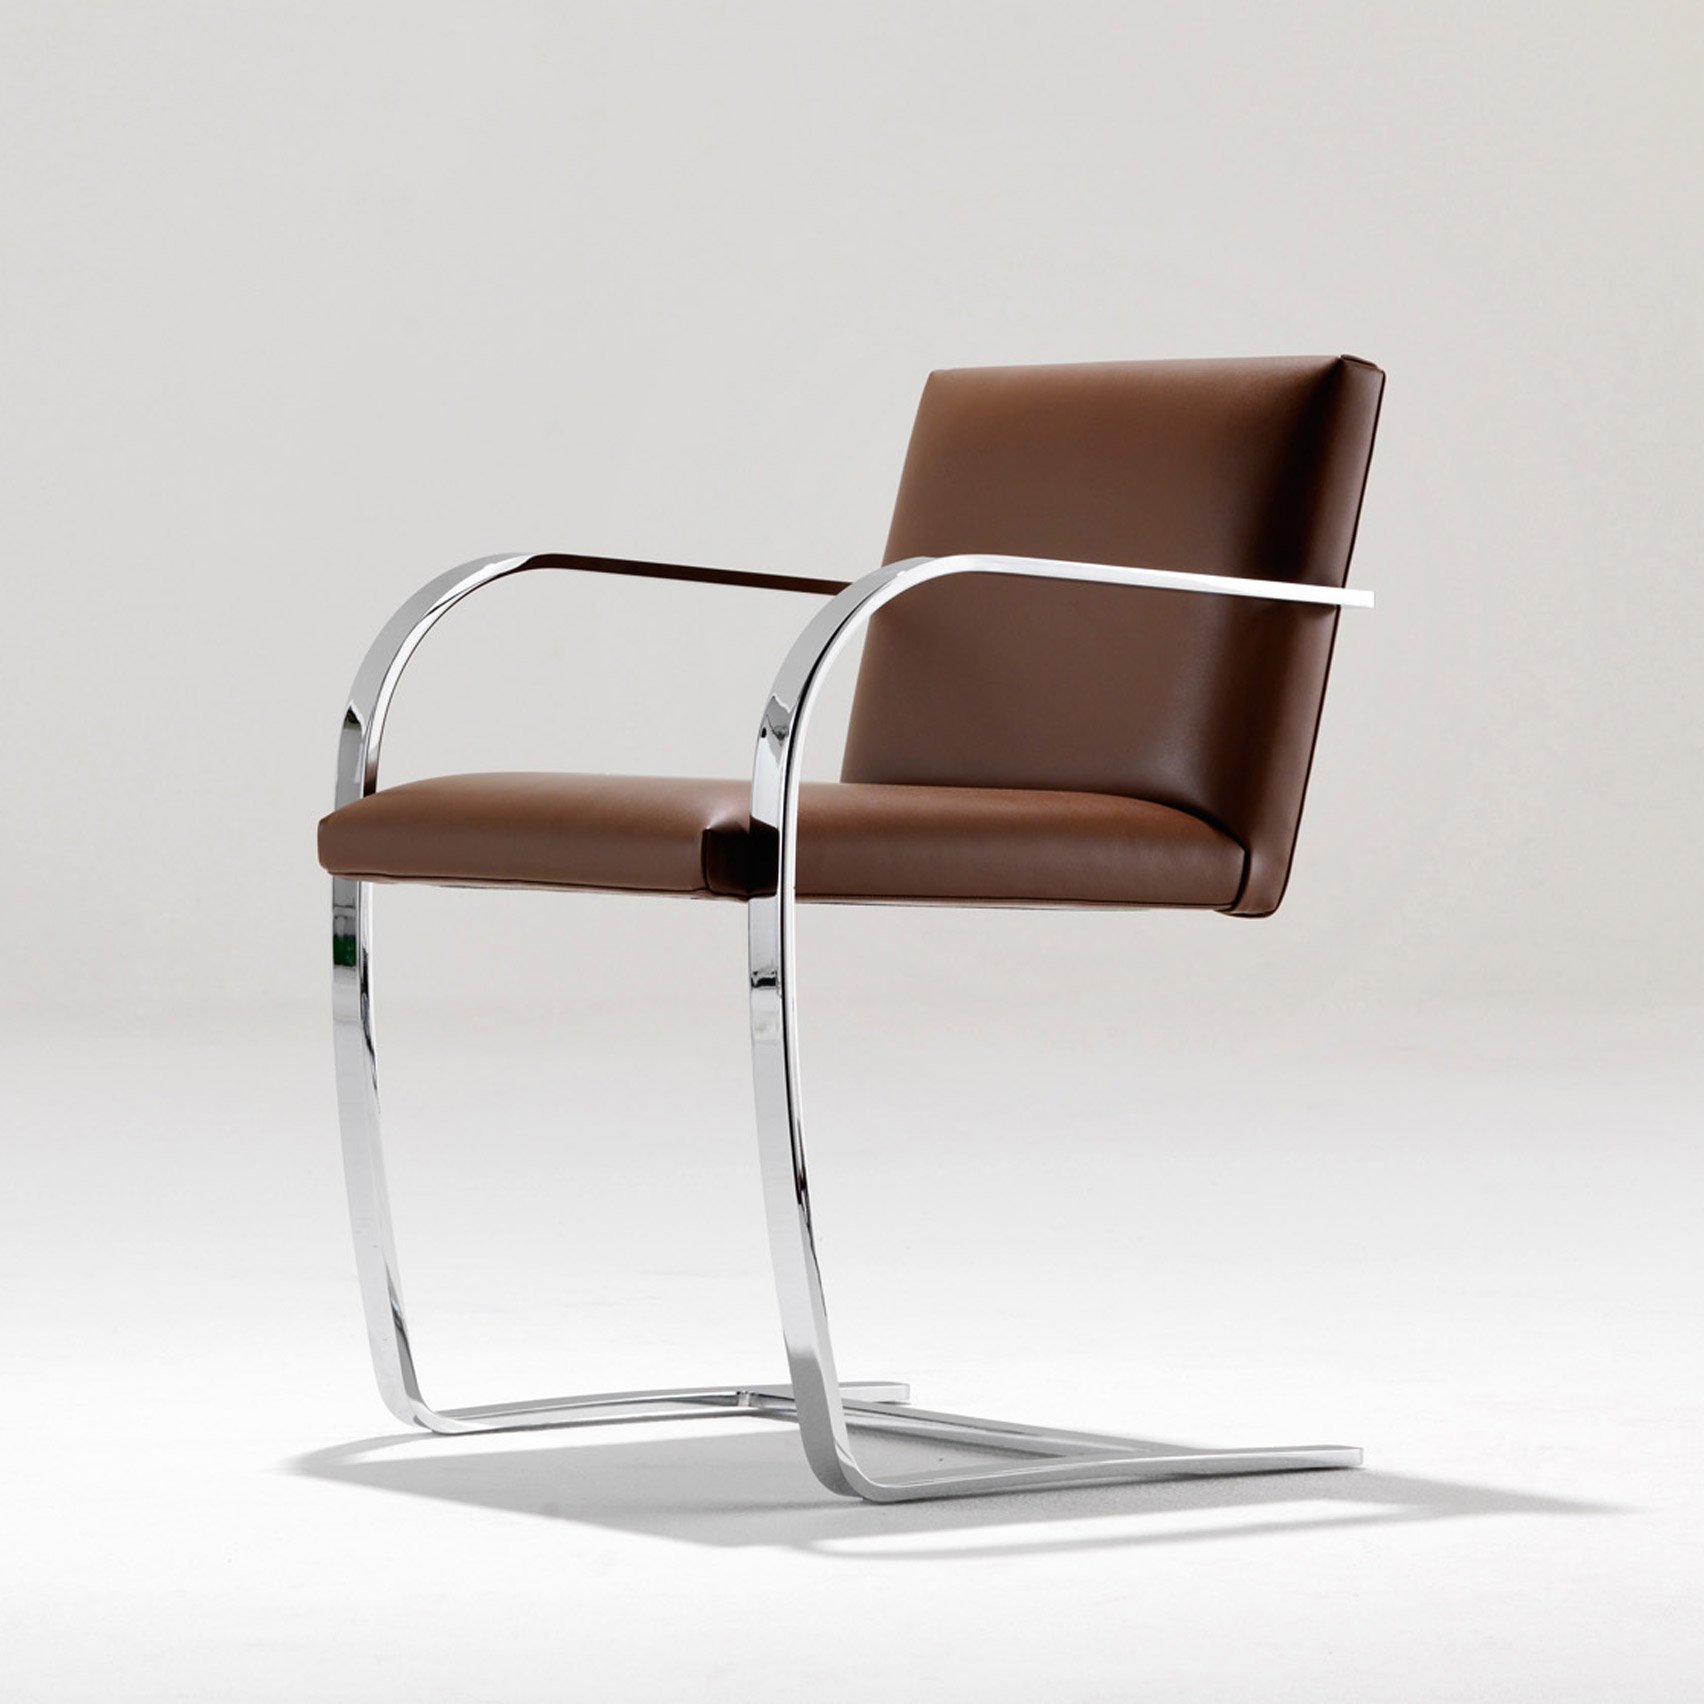 20 best of design chairs: the character of a modern chair